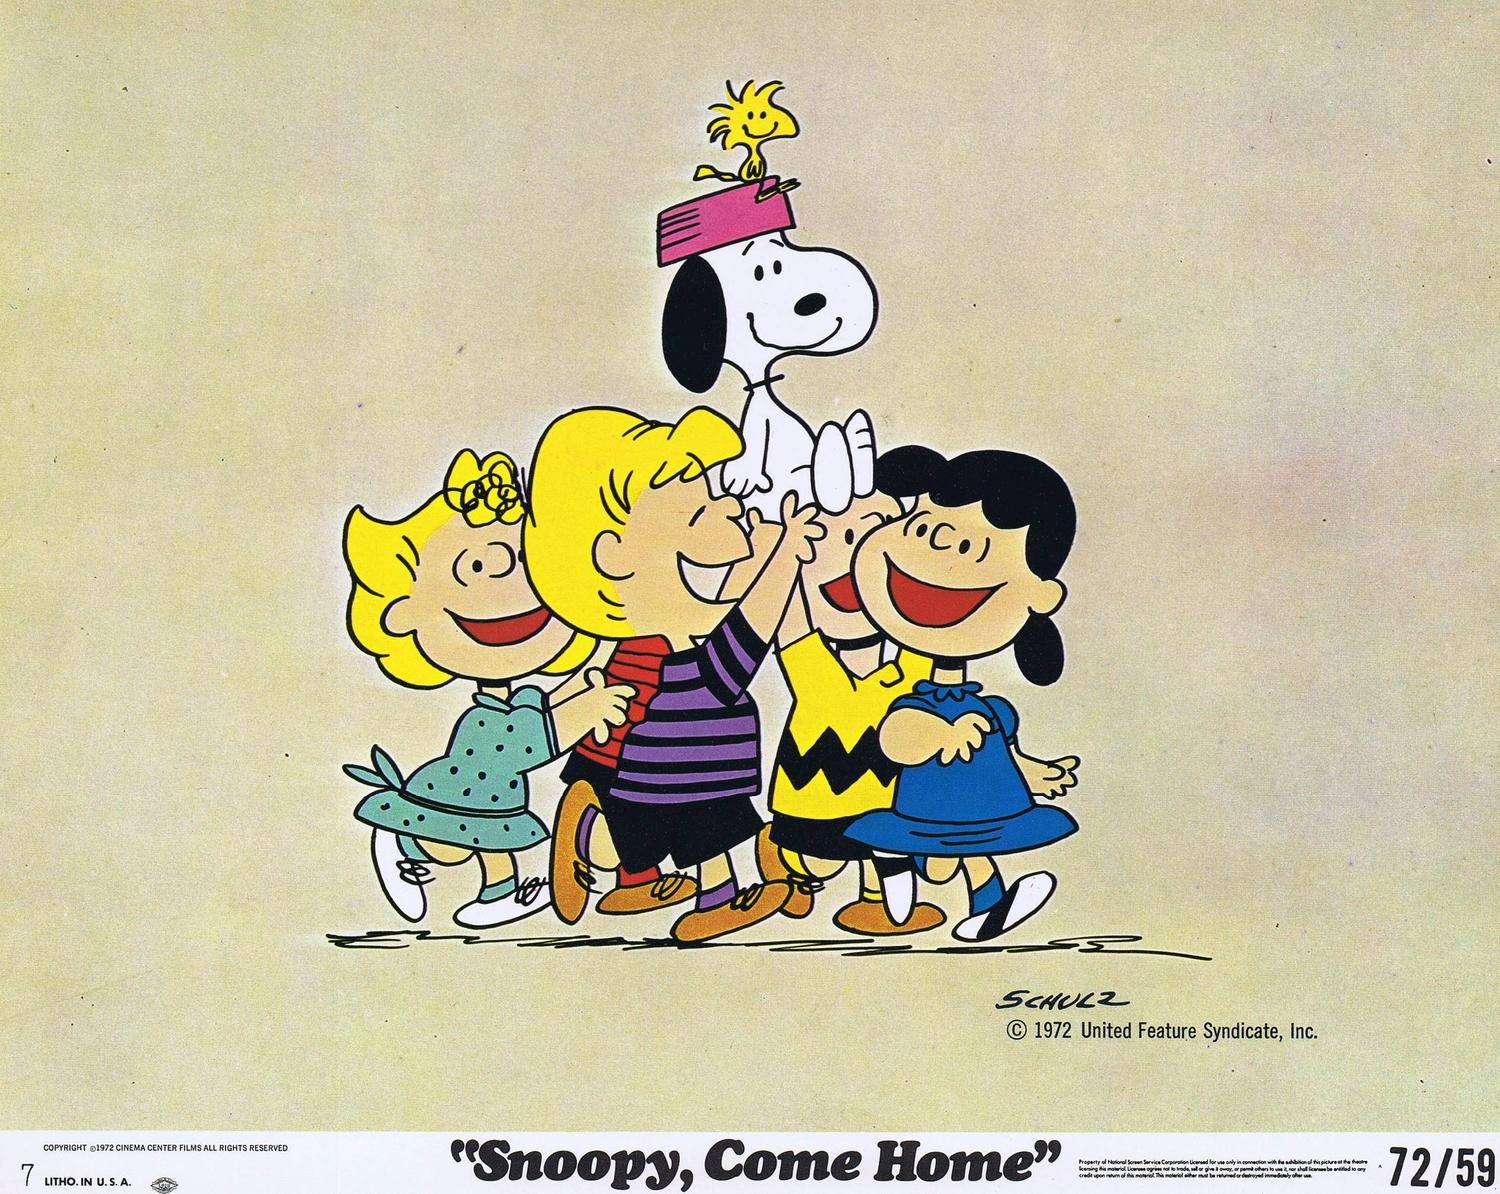 Snoopy Come Home Pics, Movie Collection